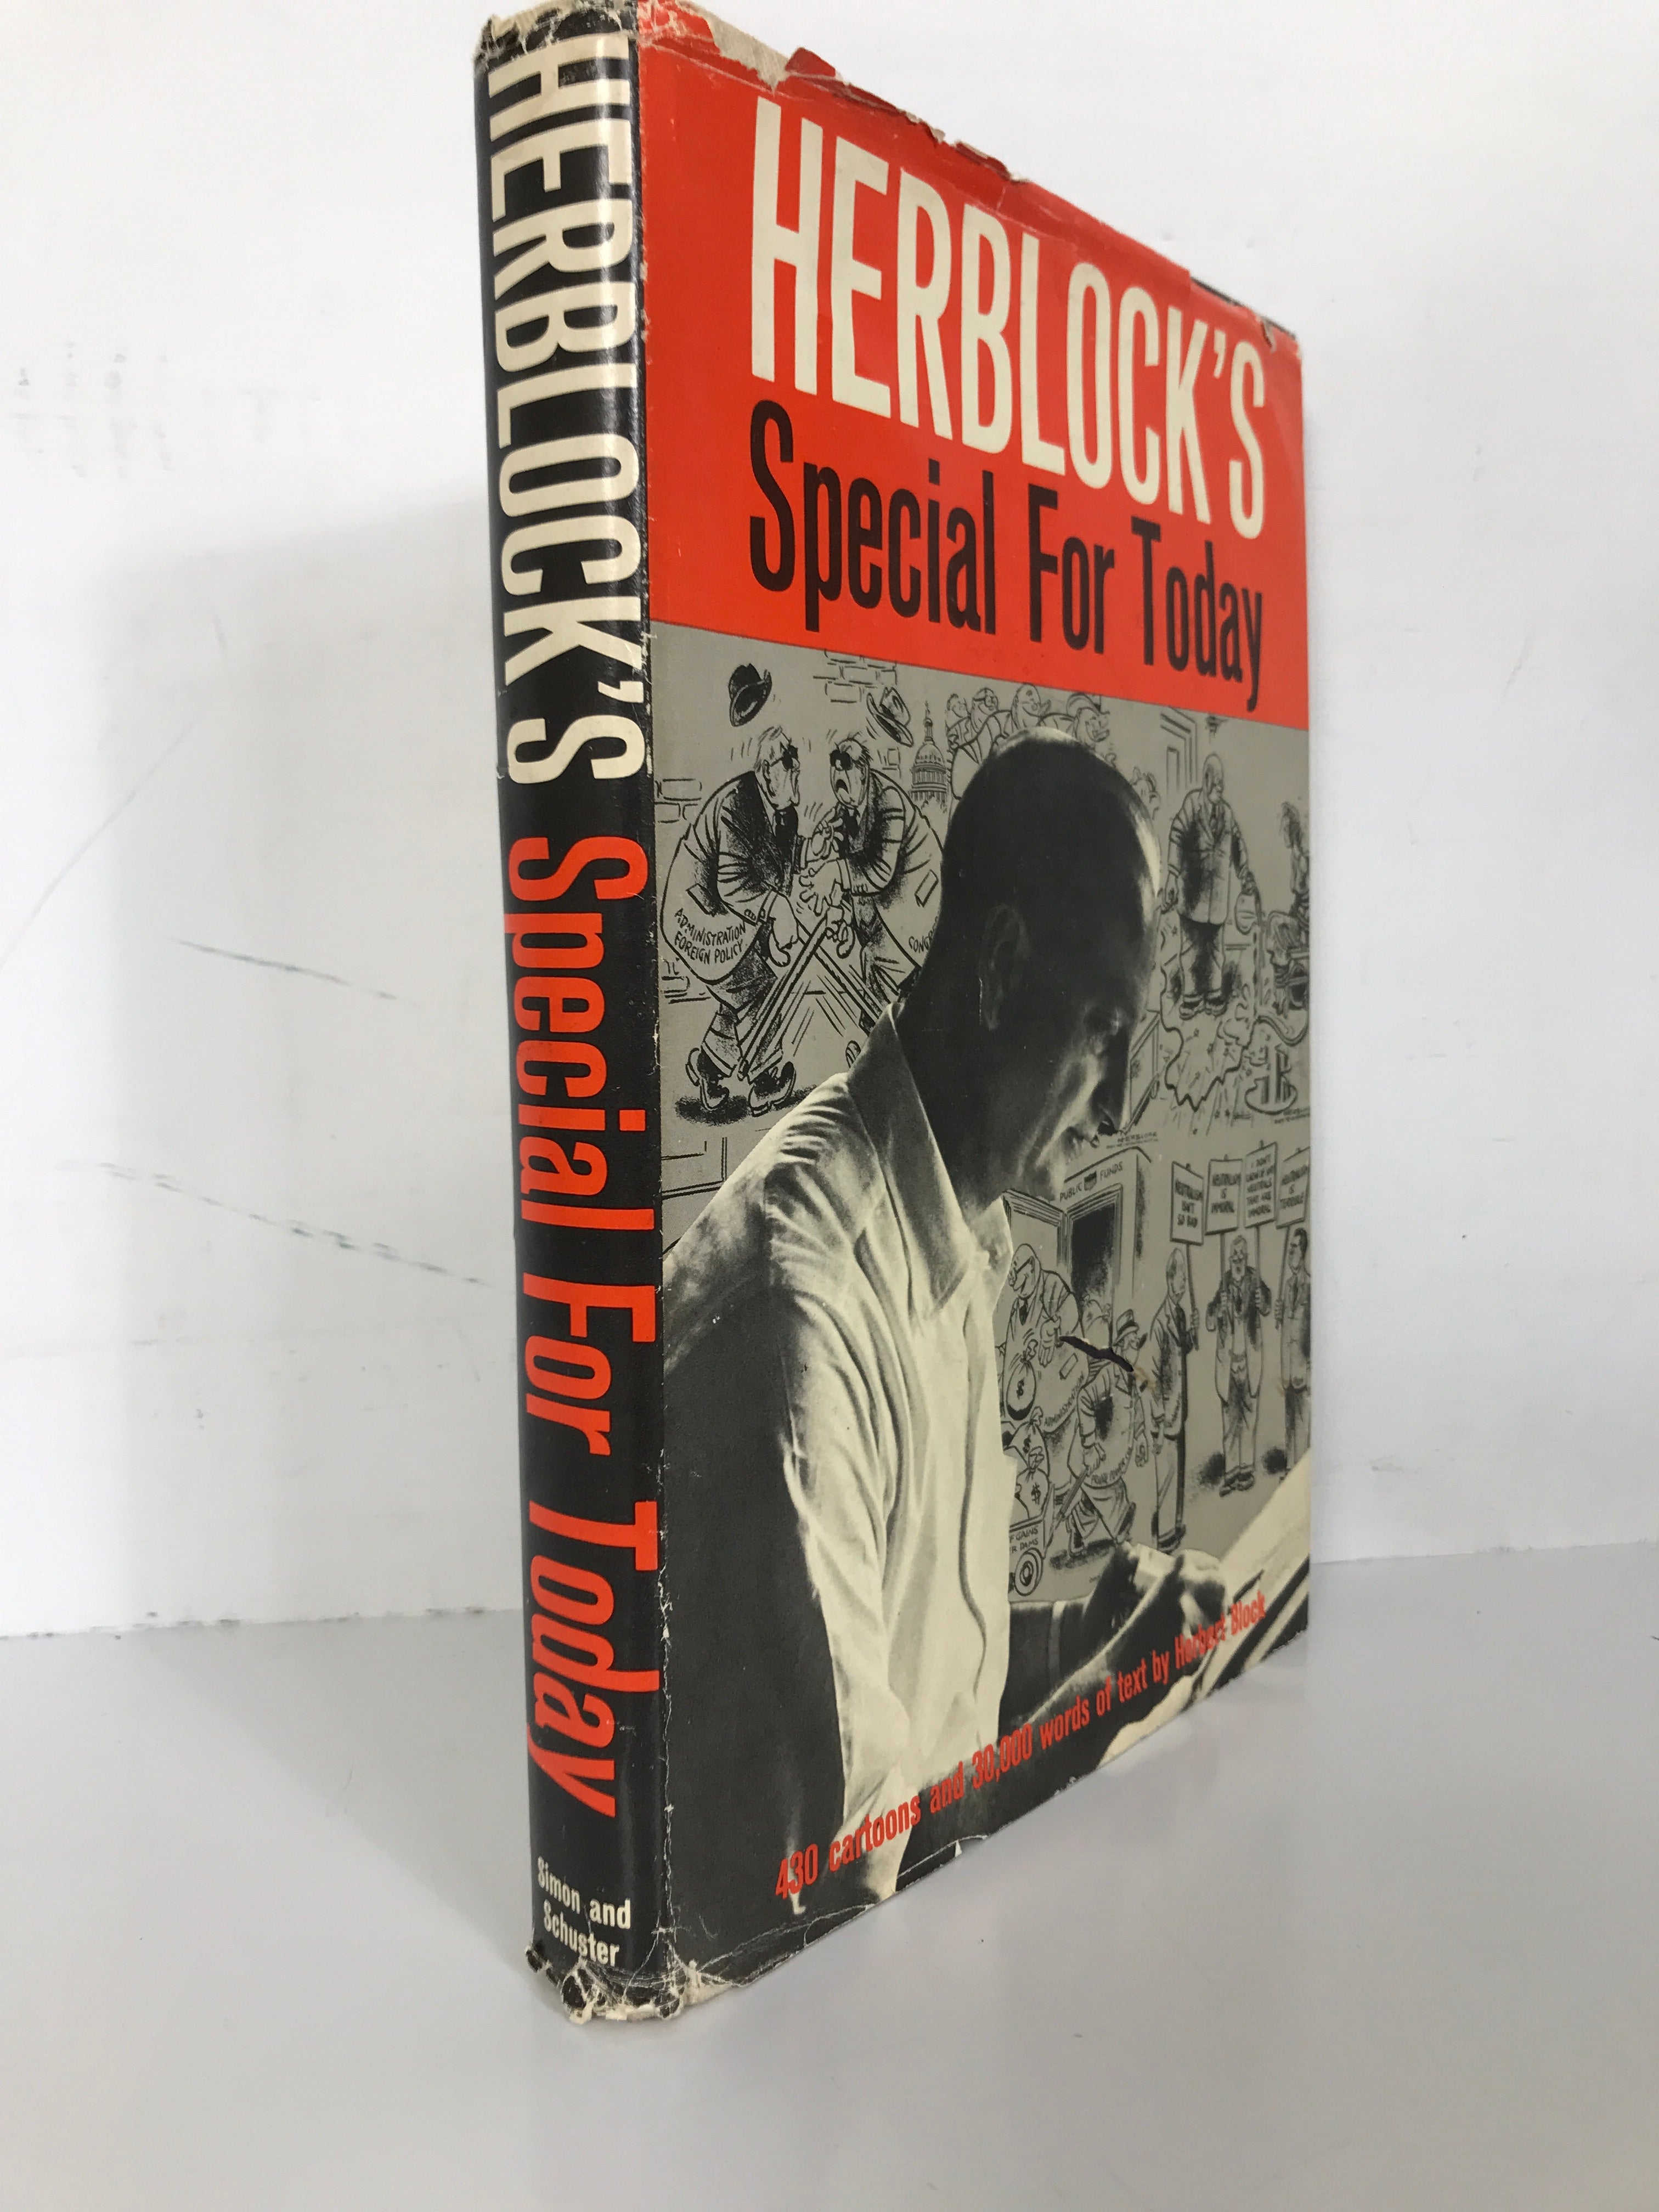 Herblock's Special for Today  by Block 1958 1st Print Political Cartoons HC DJ